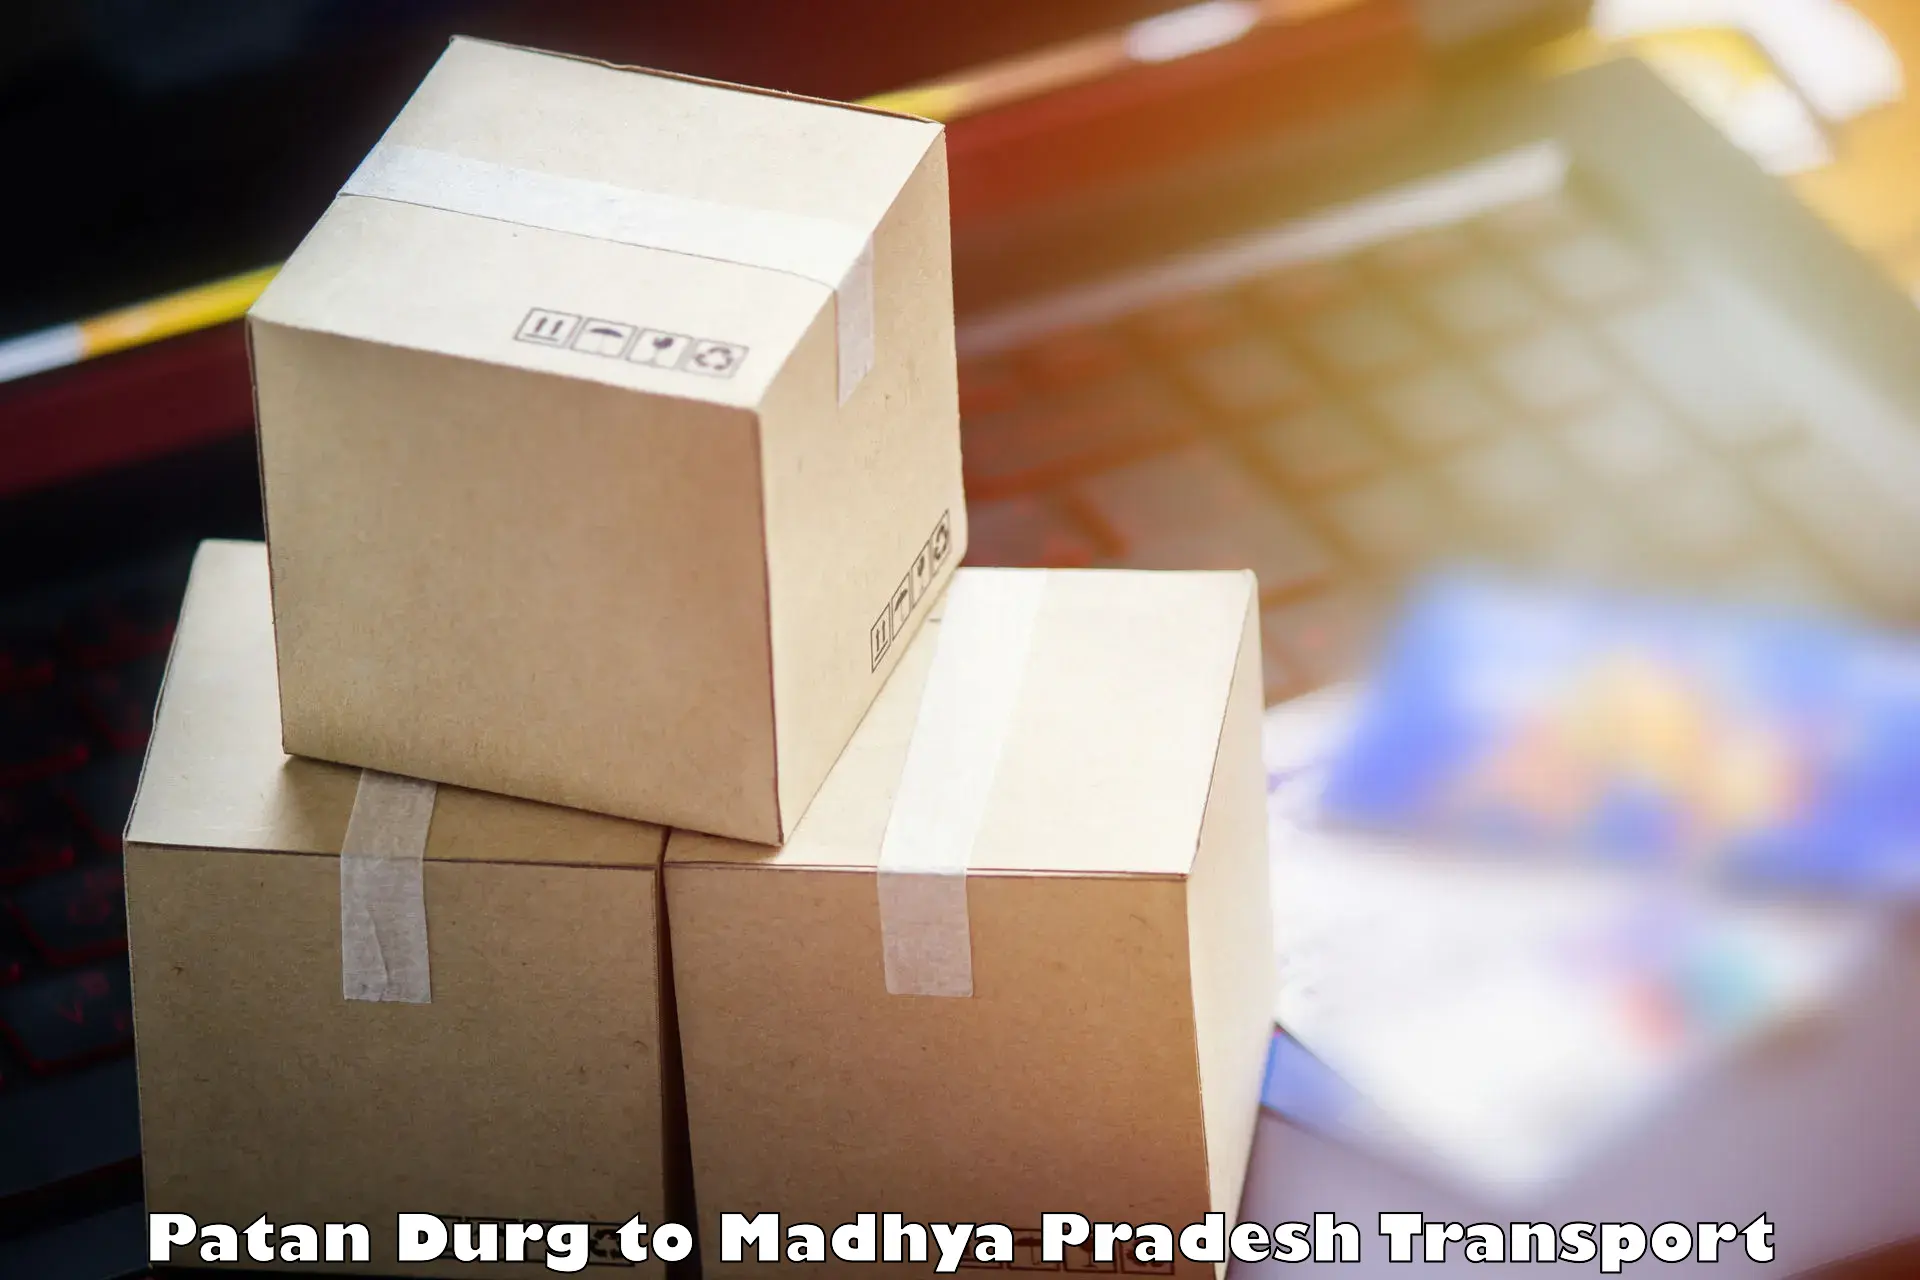 Part load transport service in India Patan Durg to Garoth